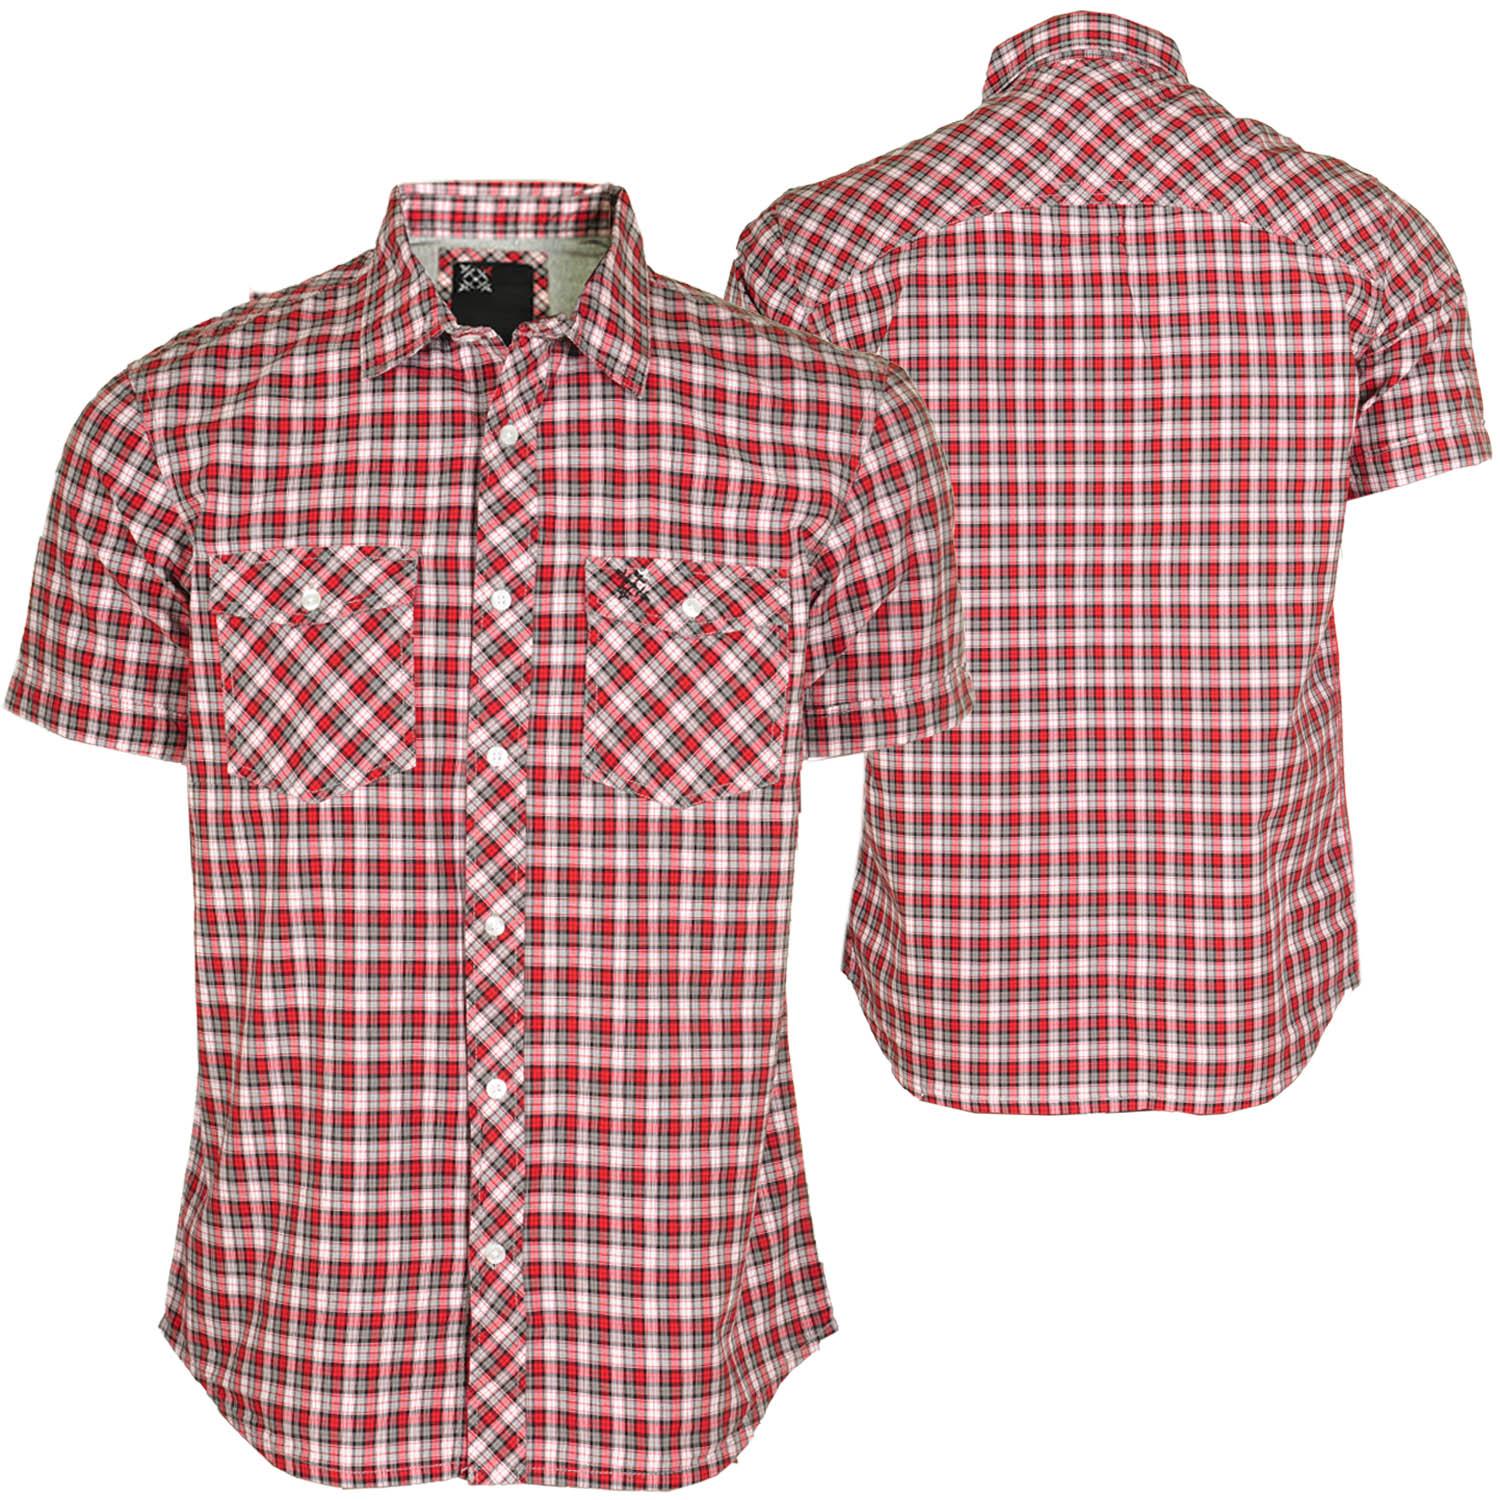 Foto Oxbow Curreaux Tisses Hombres Camisas Rojo Multicullor